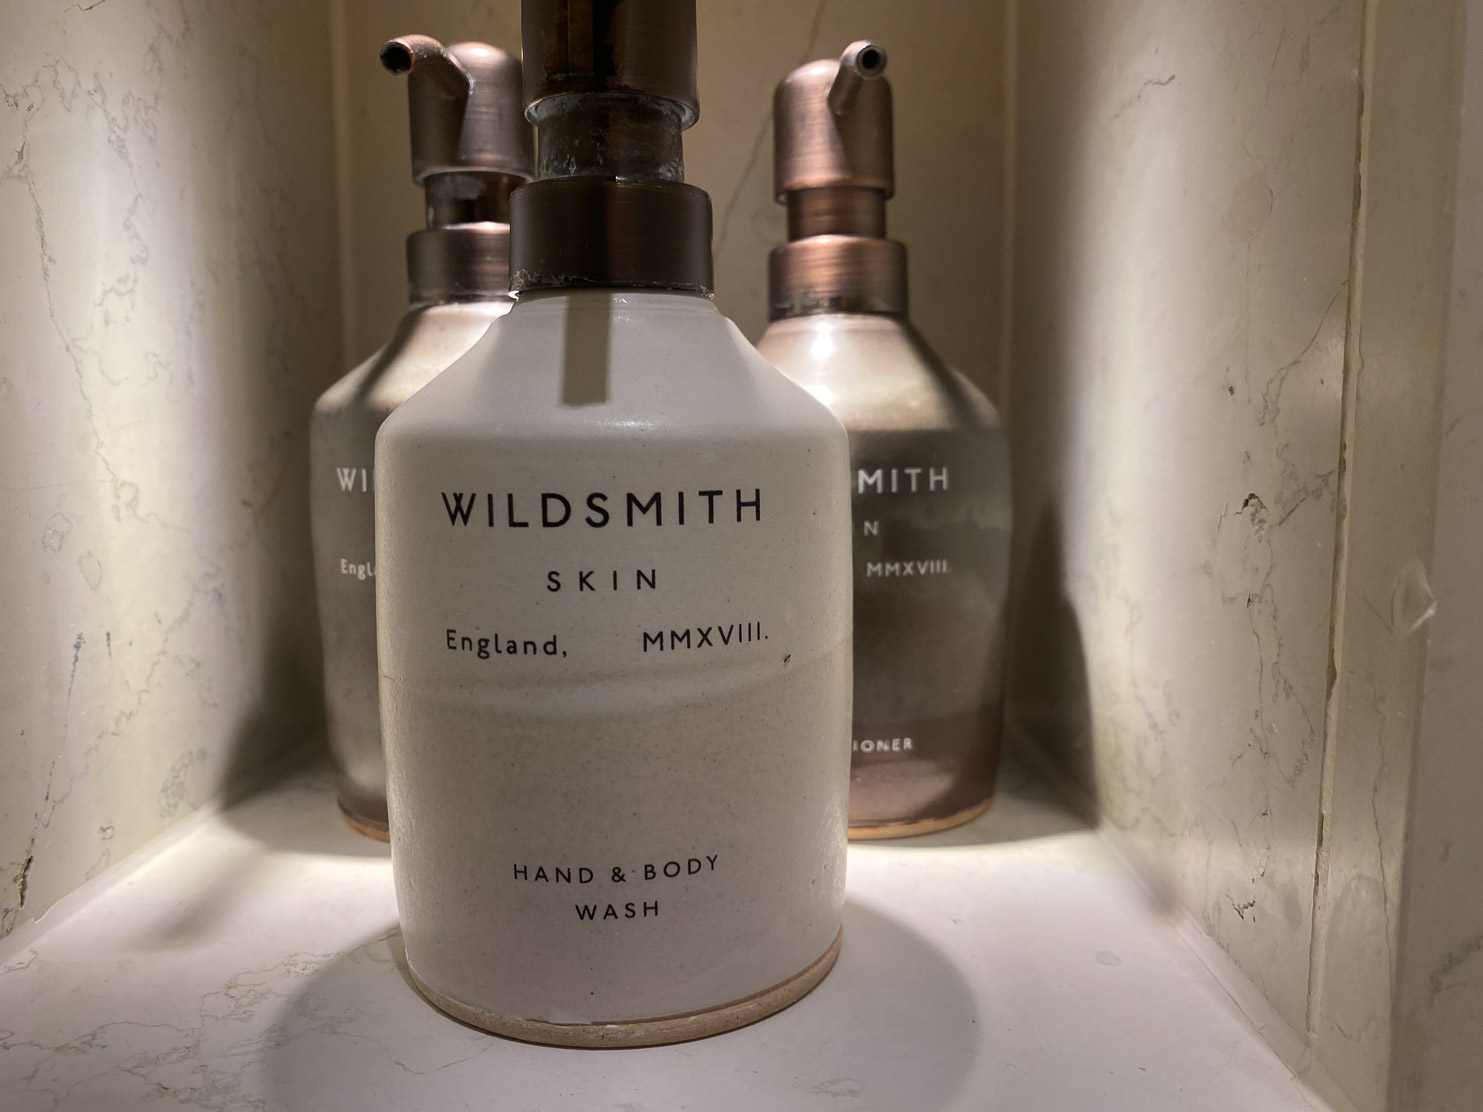 Heckfield Place The refillable and organic room products from Wildsmith which is created on the estate